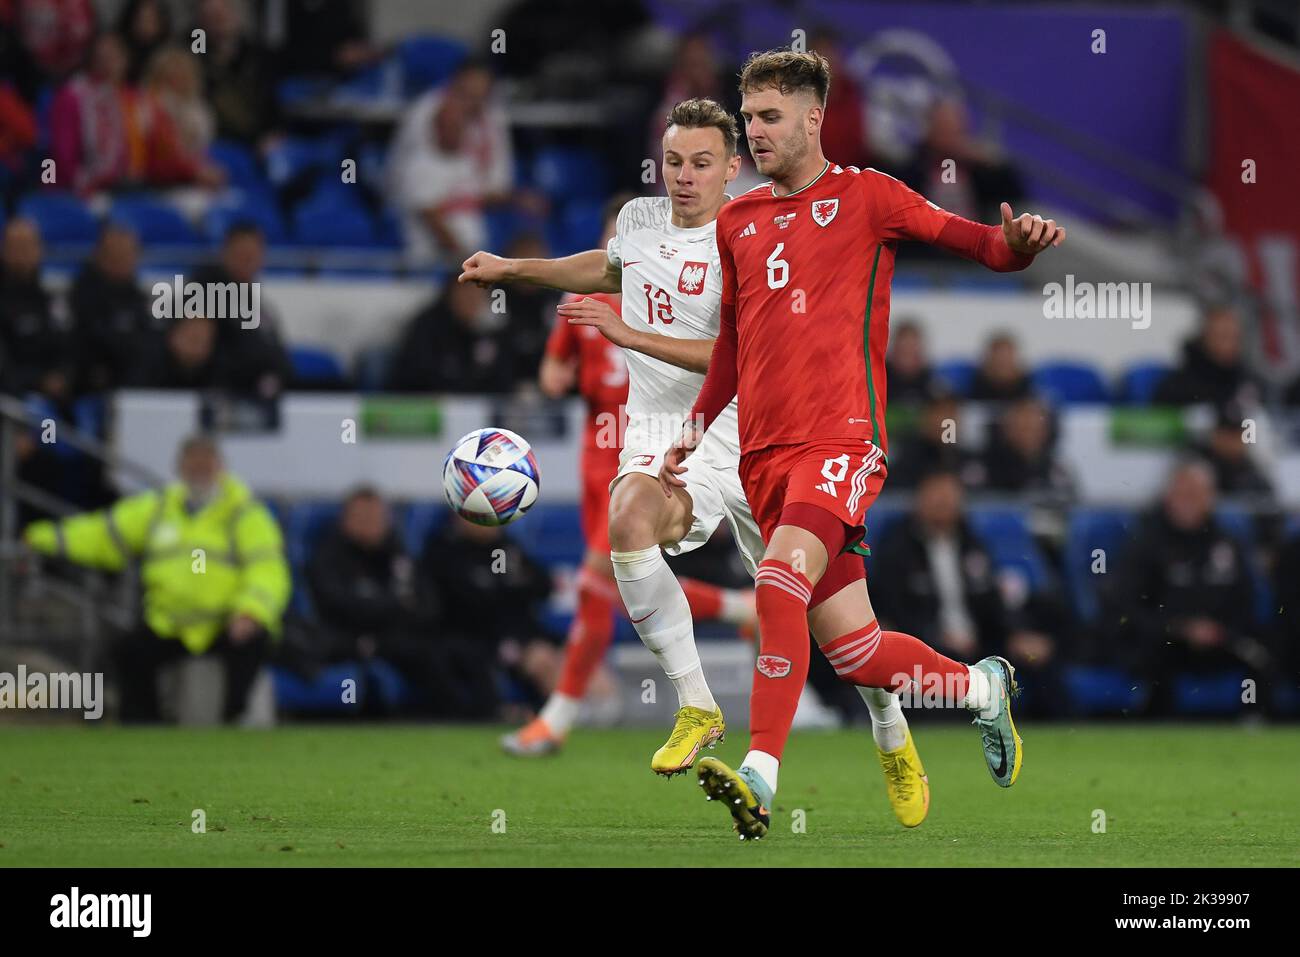 Joe Rodon of Wales Under pressure from Poland's Szymon ?urkowski during the UEFA Nations League Group A4 match between Wales vs Poland at Cardiff City Stadium, Cardiff, United Kingdom, 25th September 2022  (Photo by Mike Jones/News Images) Stock Photo